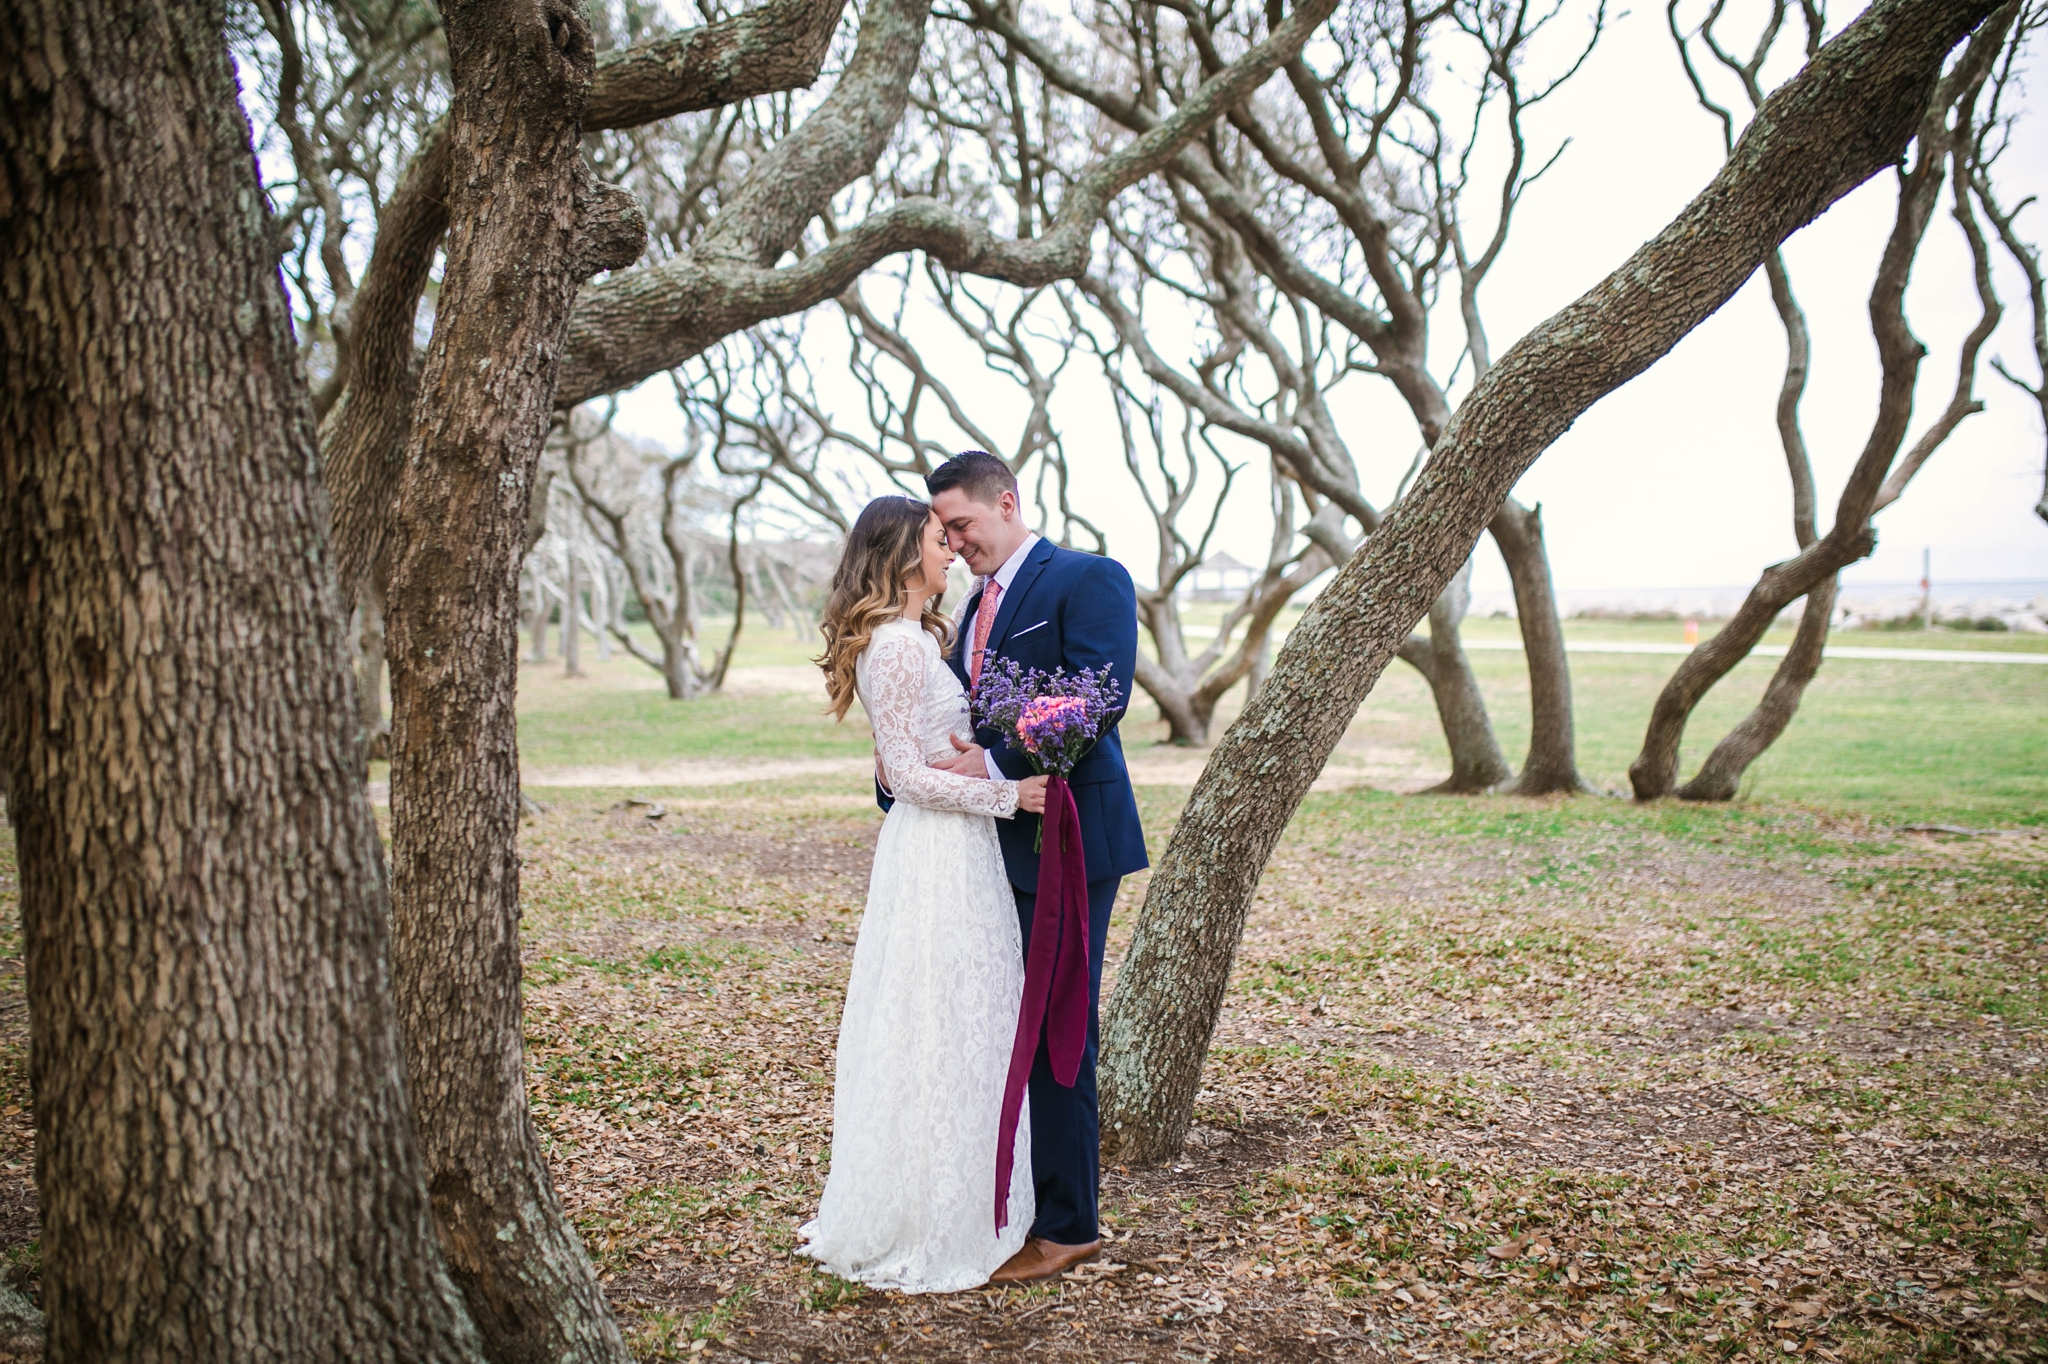 Beach Elopement Photography within the oak trees - dress by asos with purple and pink flowers and navy suit - oahu hawaii wedding photographer 